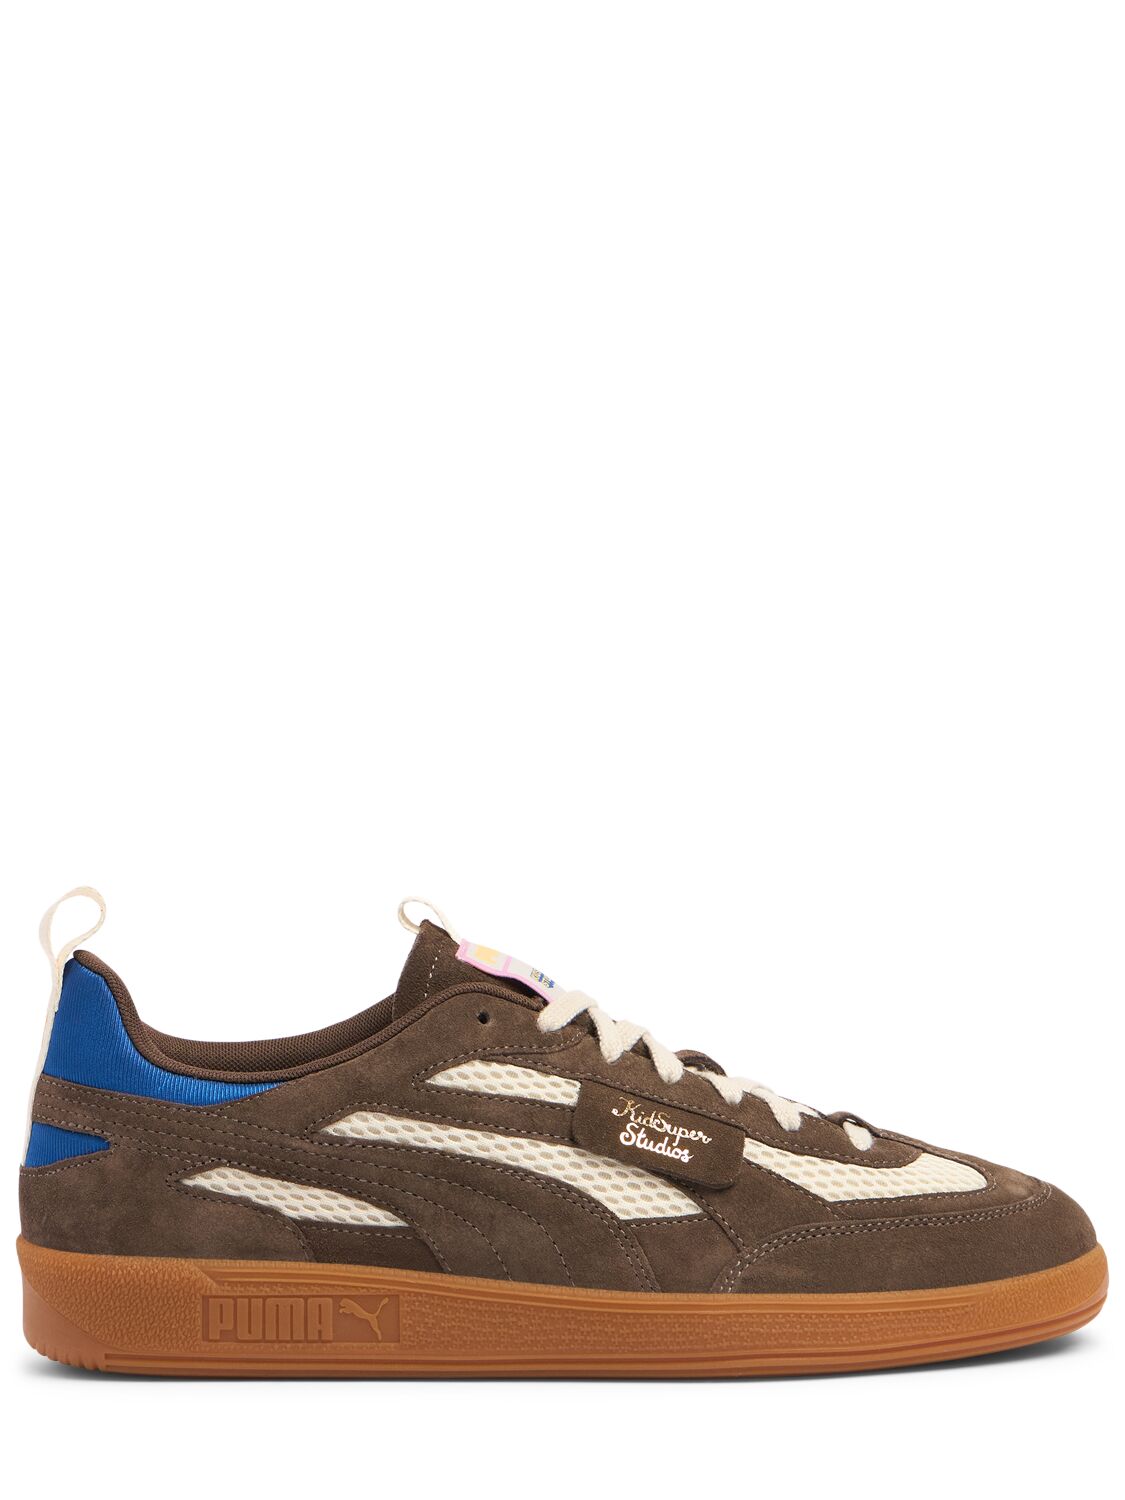 Puma Kidsuper Studios Palermo Sneakers In Flaxed Mauved